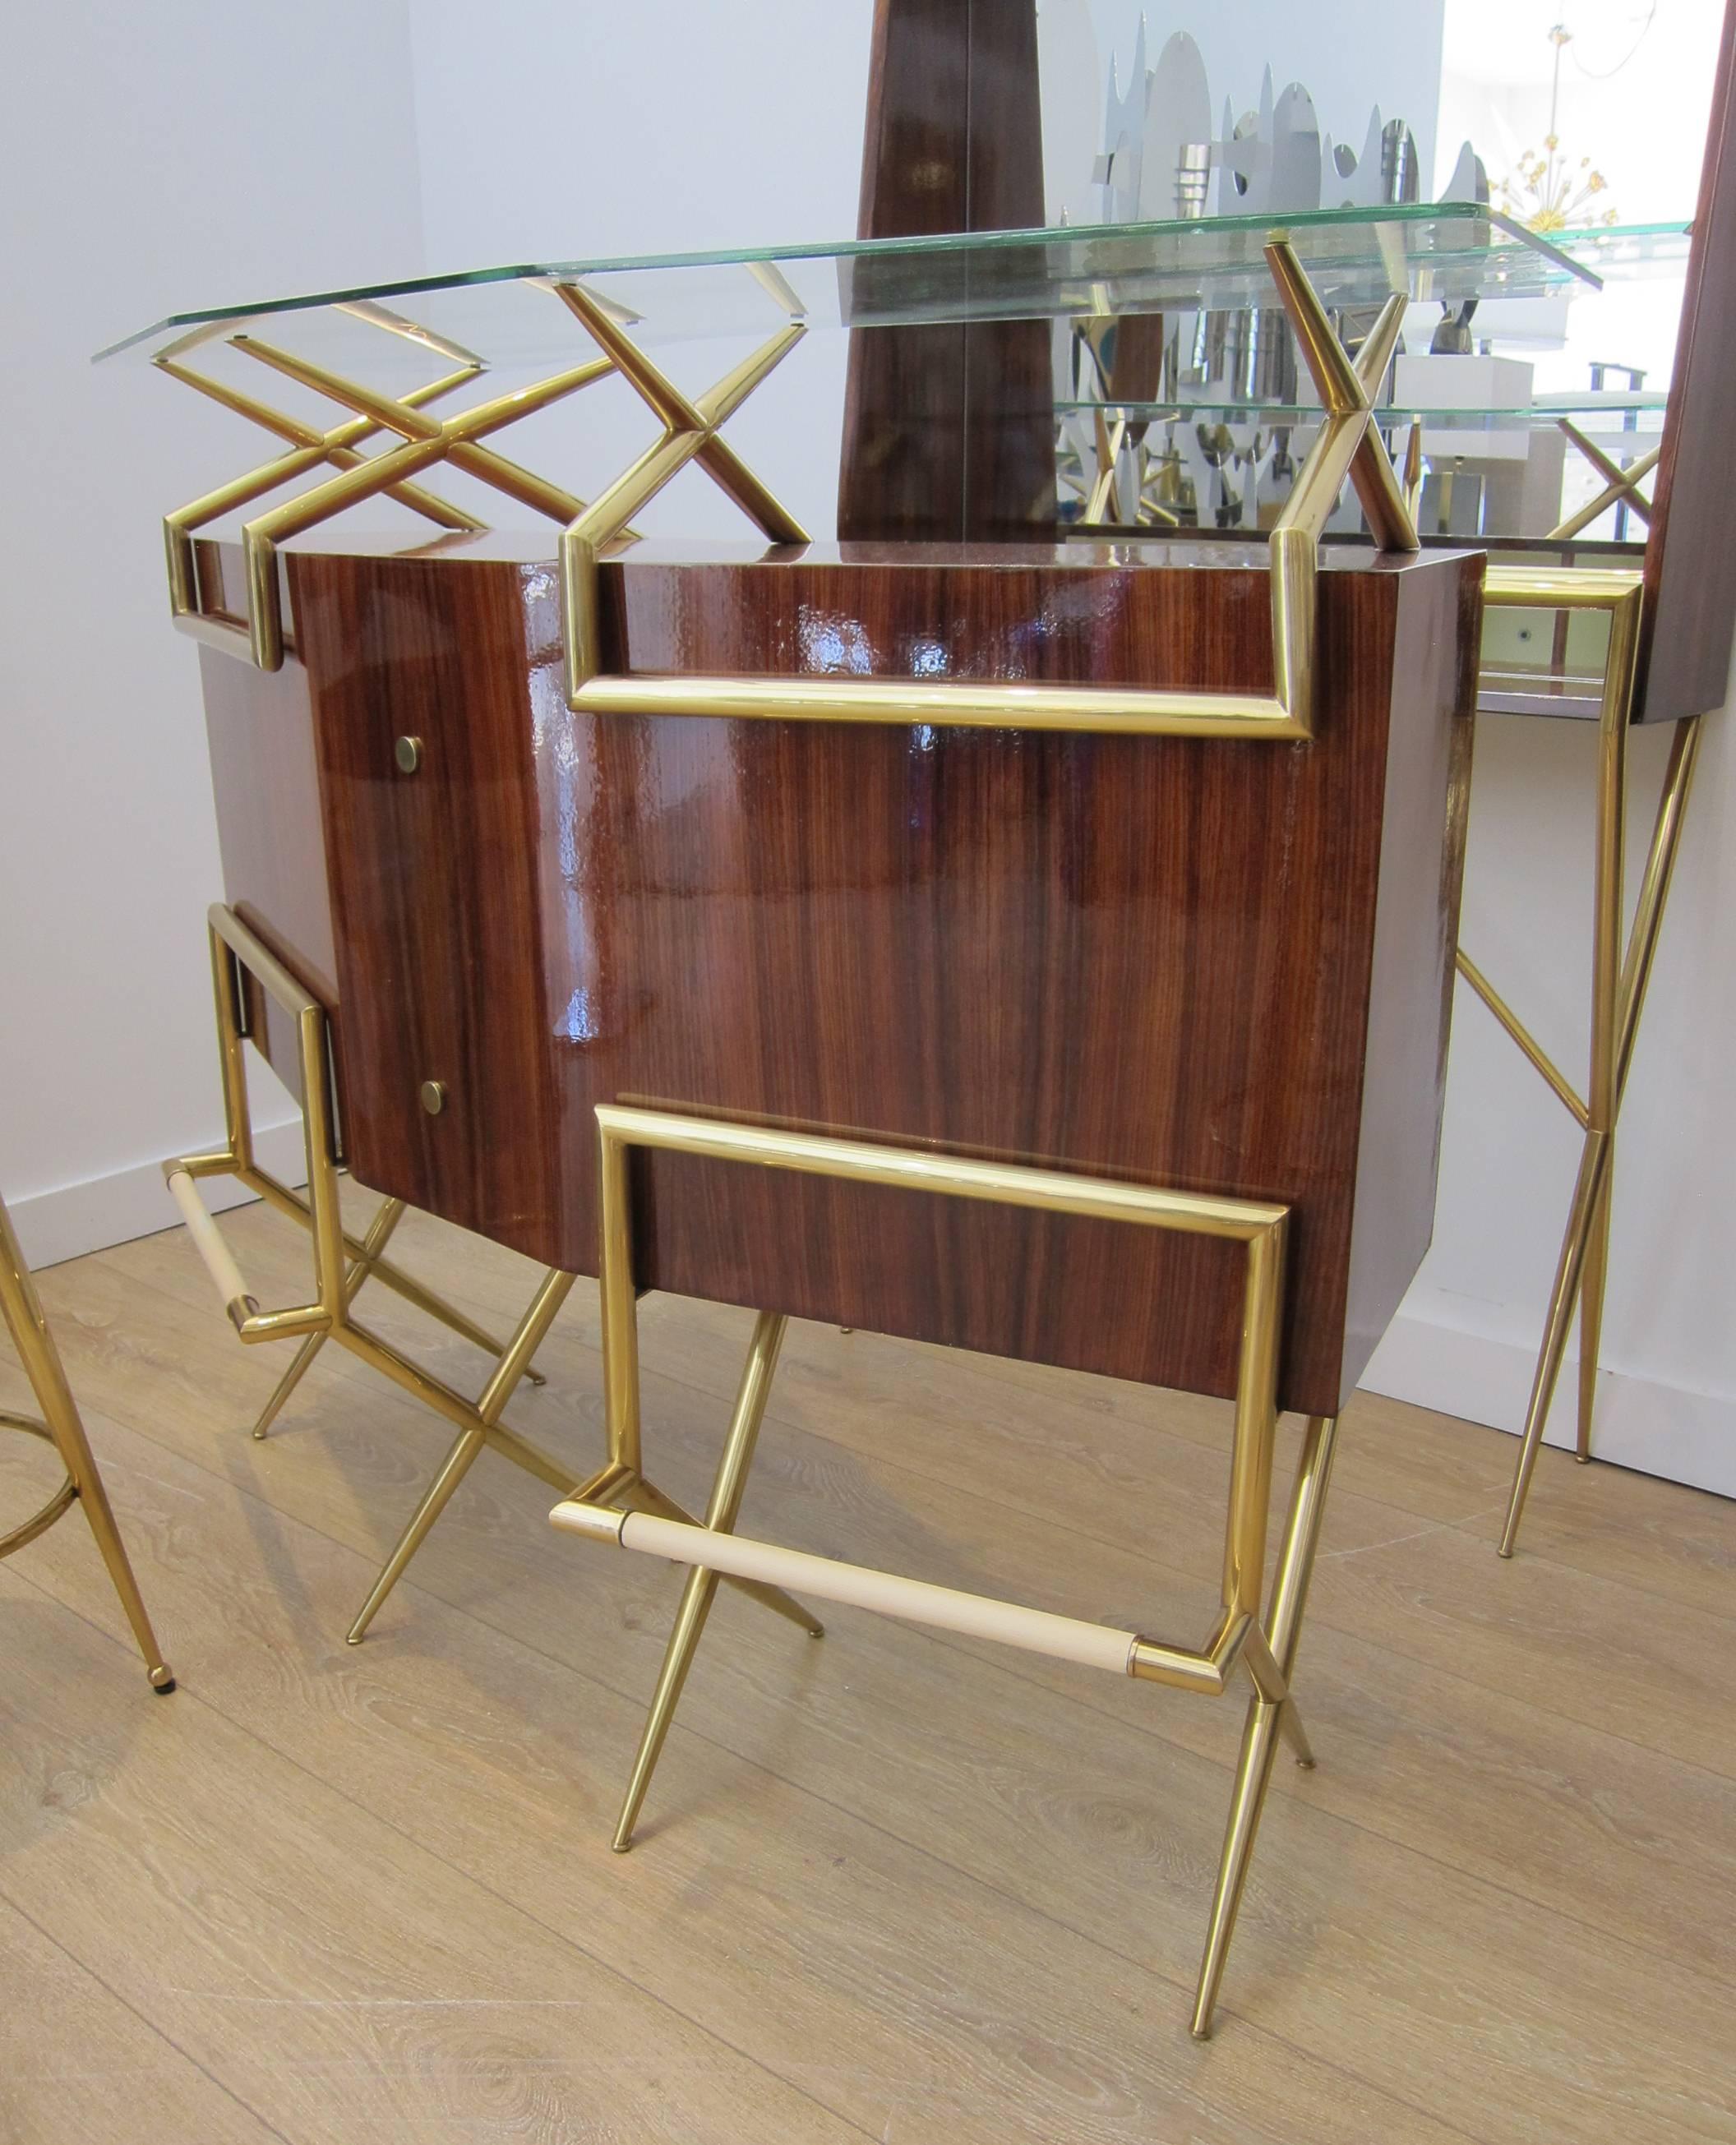 An exceptional Mid-Century Modern rosewood and brass Italian bar suite comprised of a dry bar, two brass bar stools and bar back/vitrine.
Wood work and brass restored to perfection. Newly upholstered with faux black hide.
